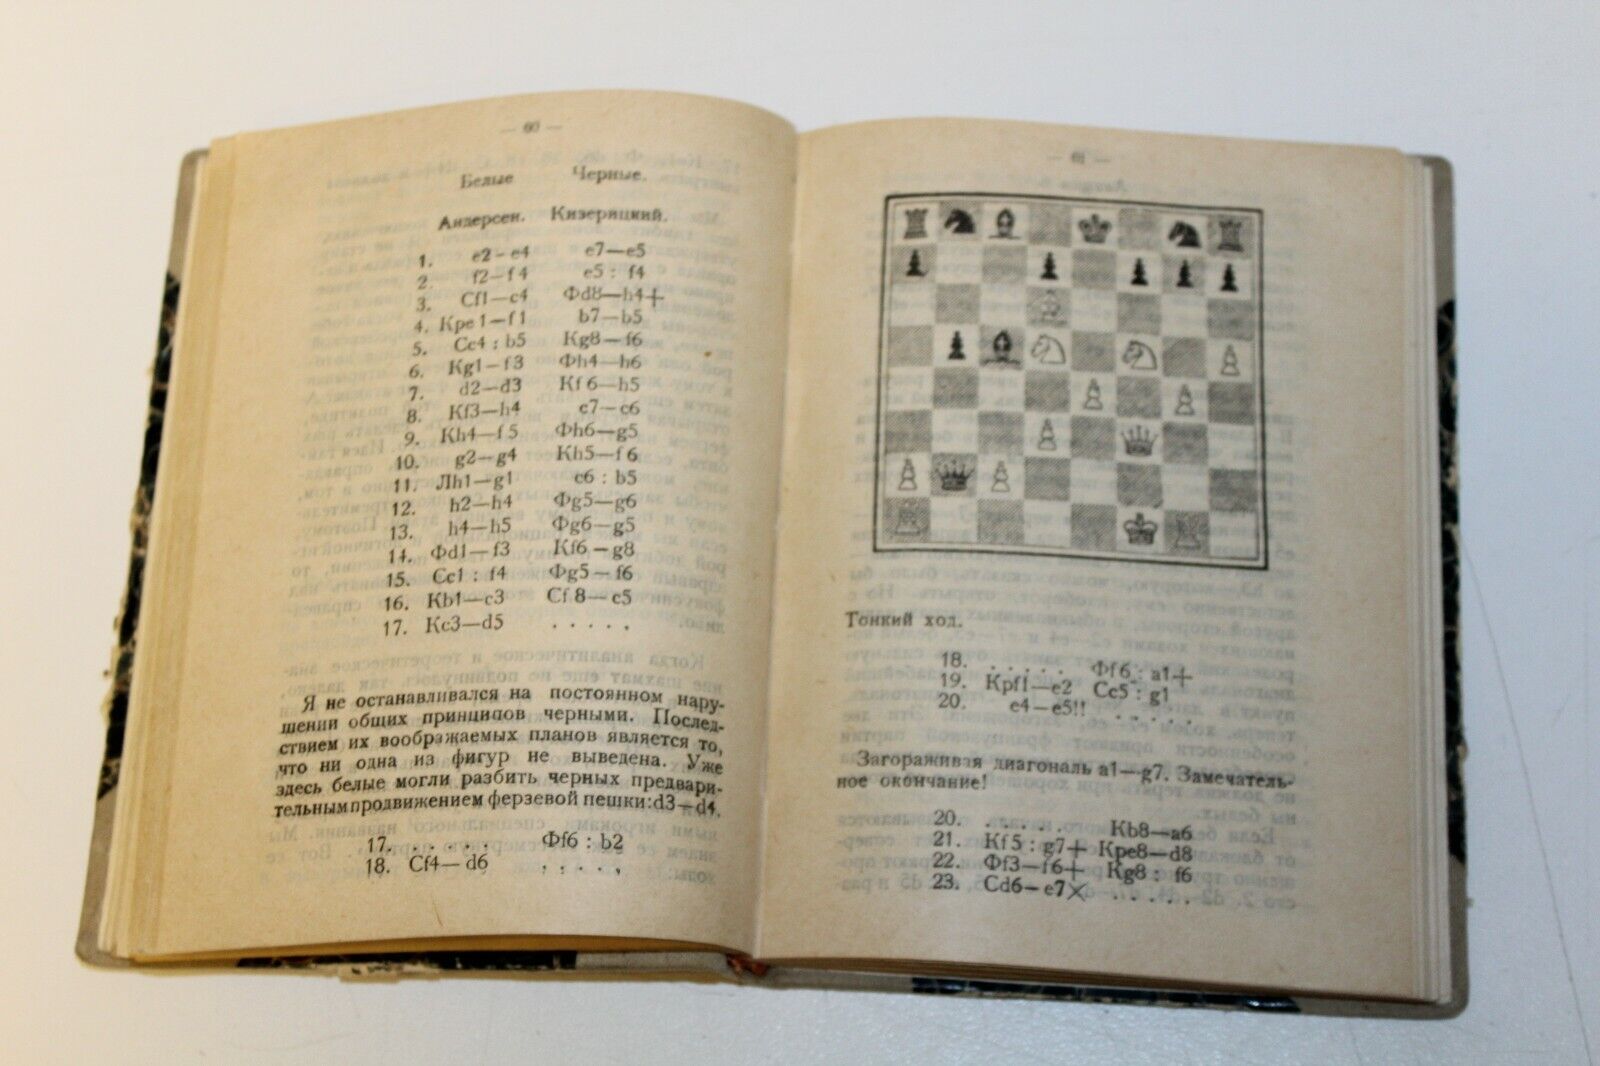 10872.Antique Russian Chess Book: Horev library.Lasker.Common sense in chess game.1925